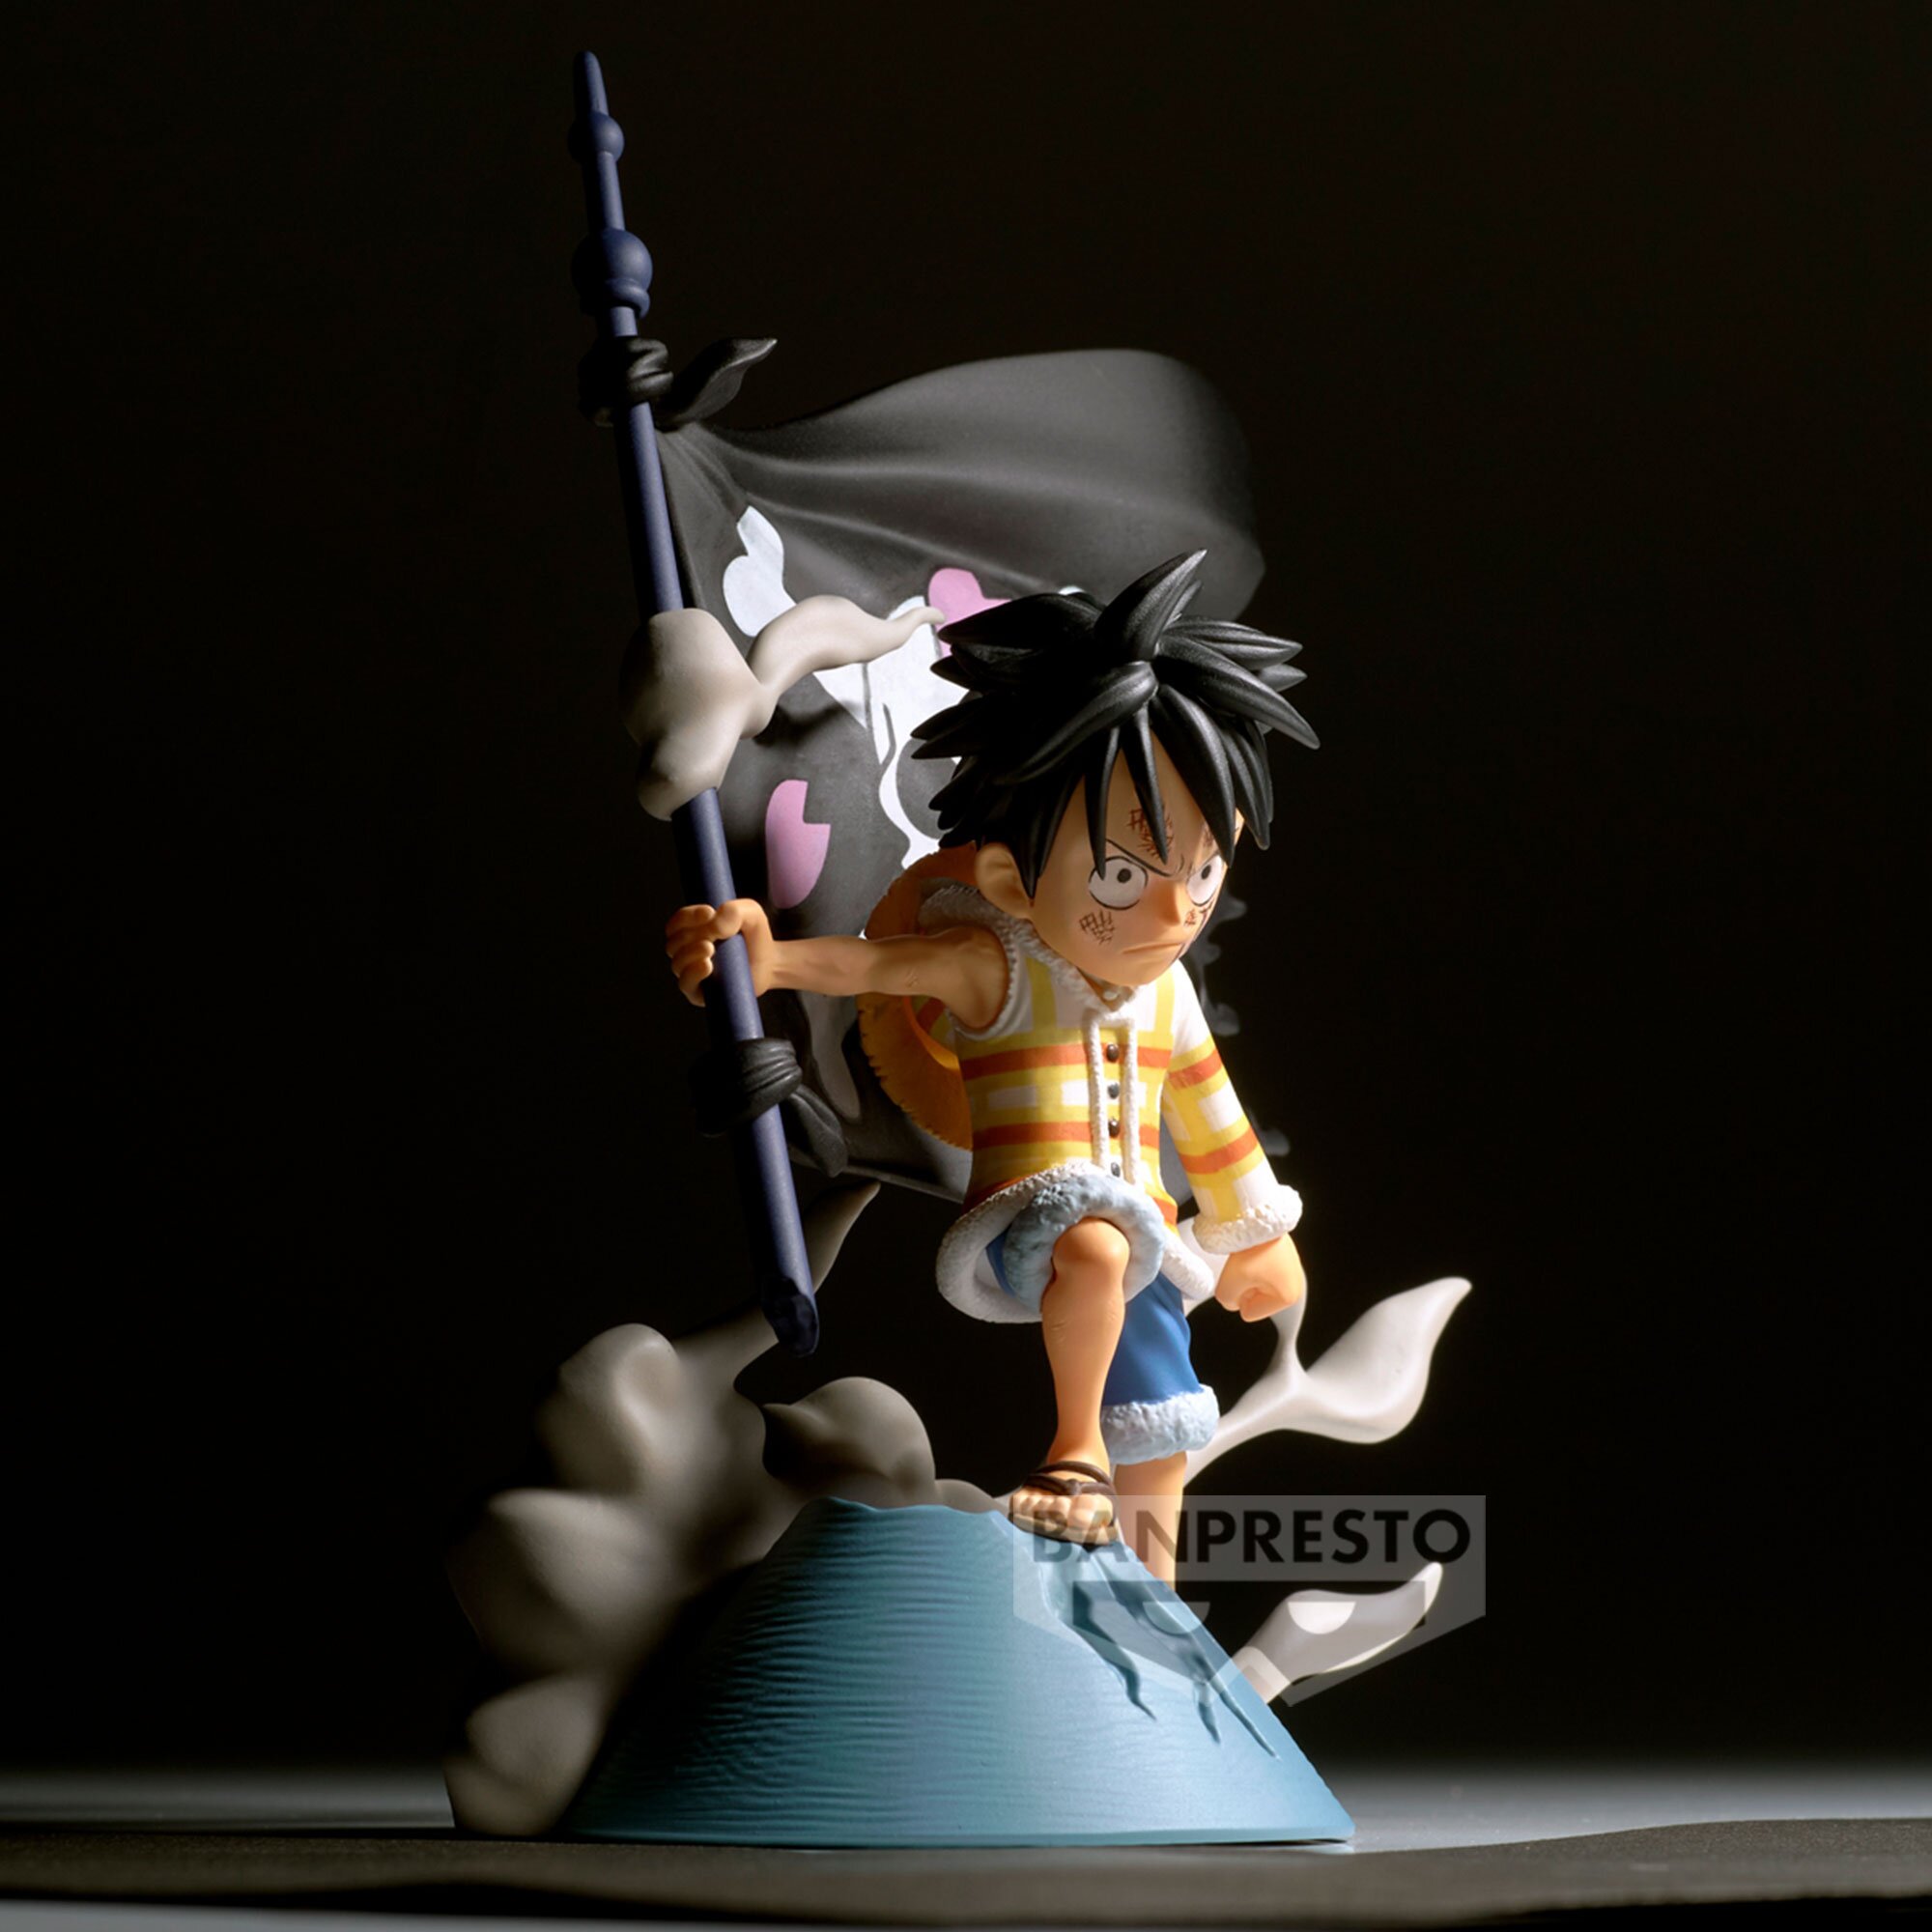 World Collectable Figure One Piece Log Stories Monkey D. Luffy